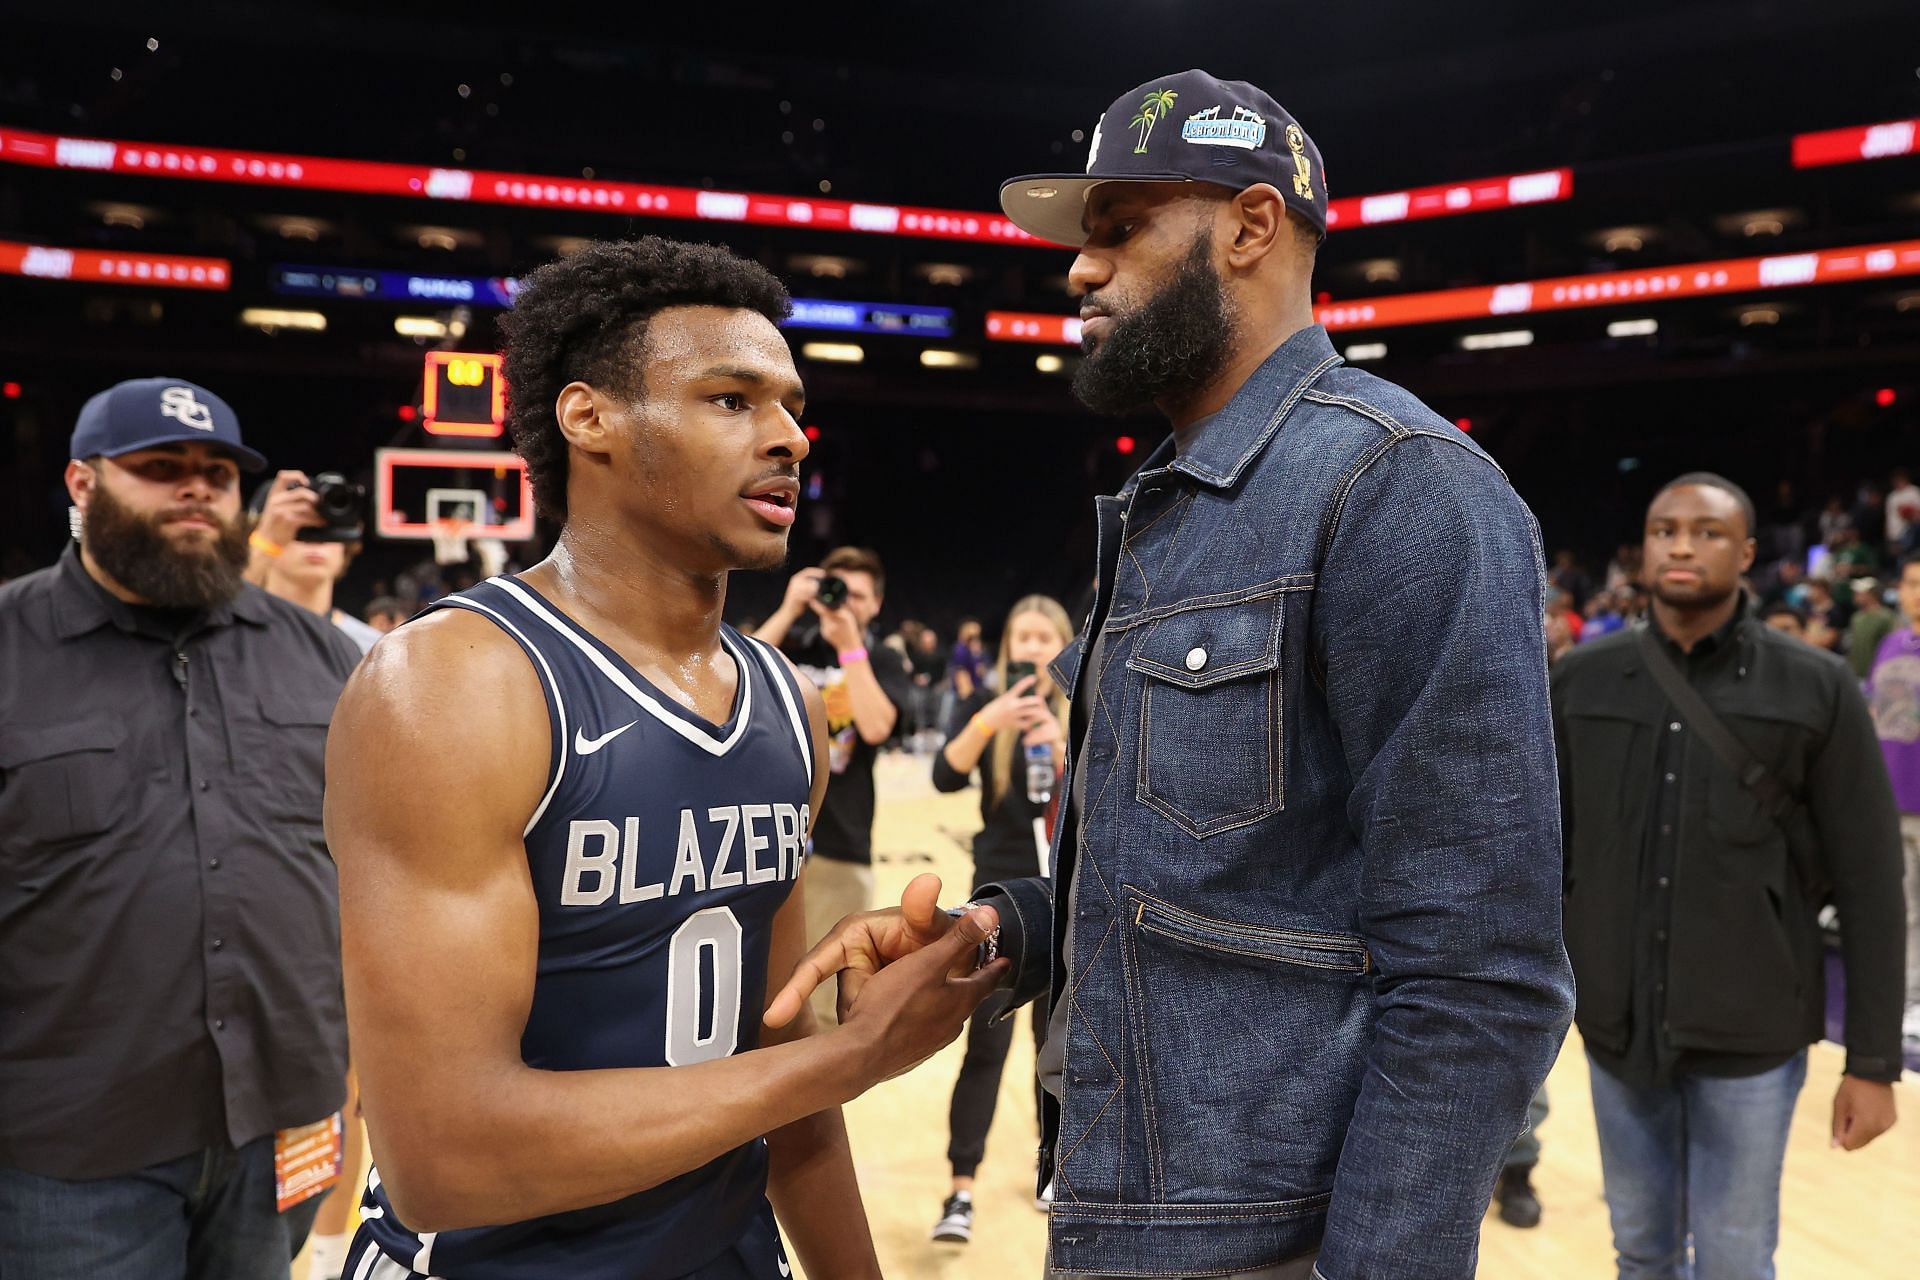 Bronny James (0) of the Sierra Canyon Trailblazers is greeted by his father, LeBron James